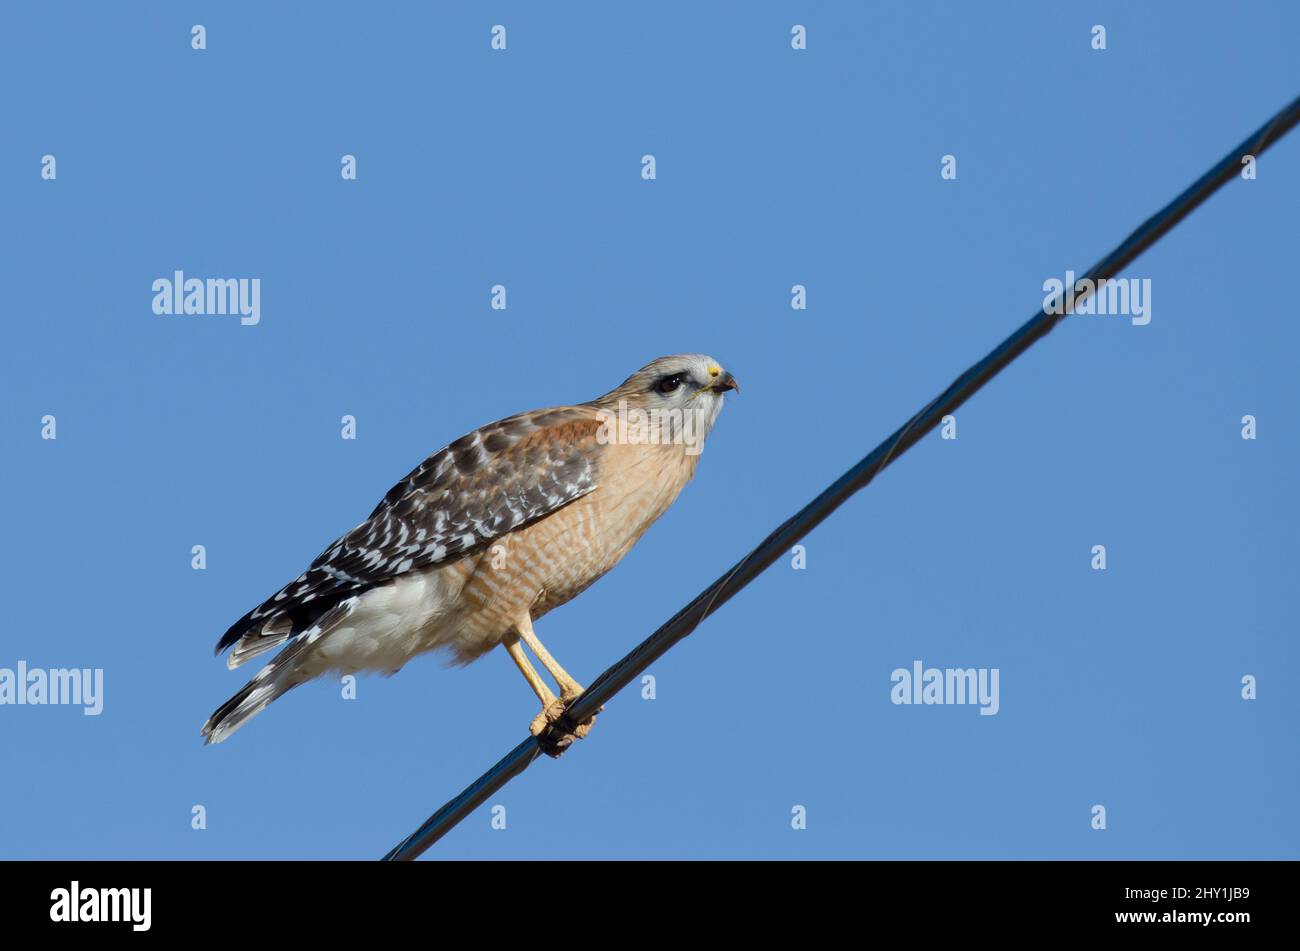 Red-shouldered Hawk, Buteo lineatus, perched on power line Stock Photo